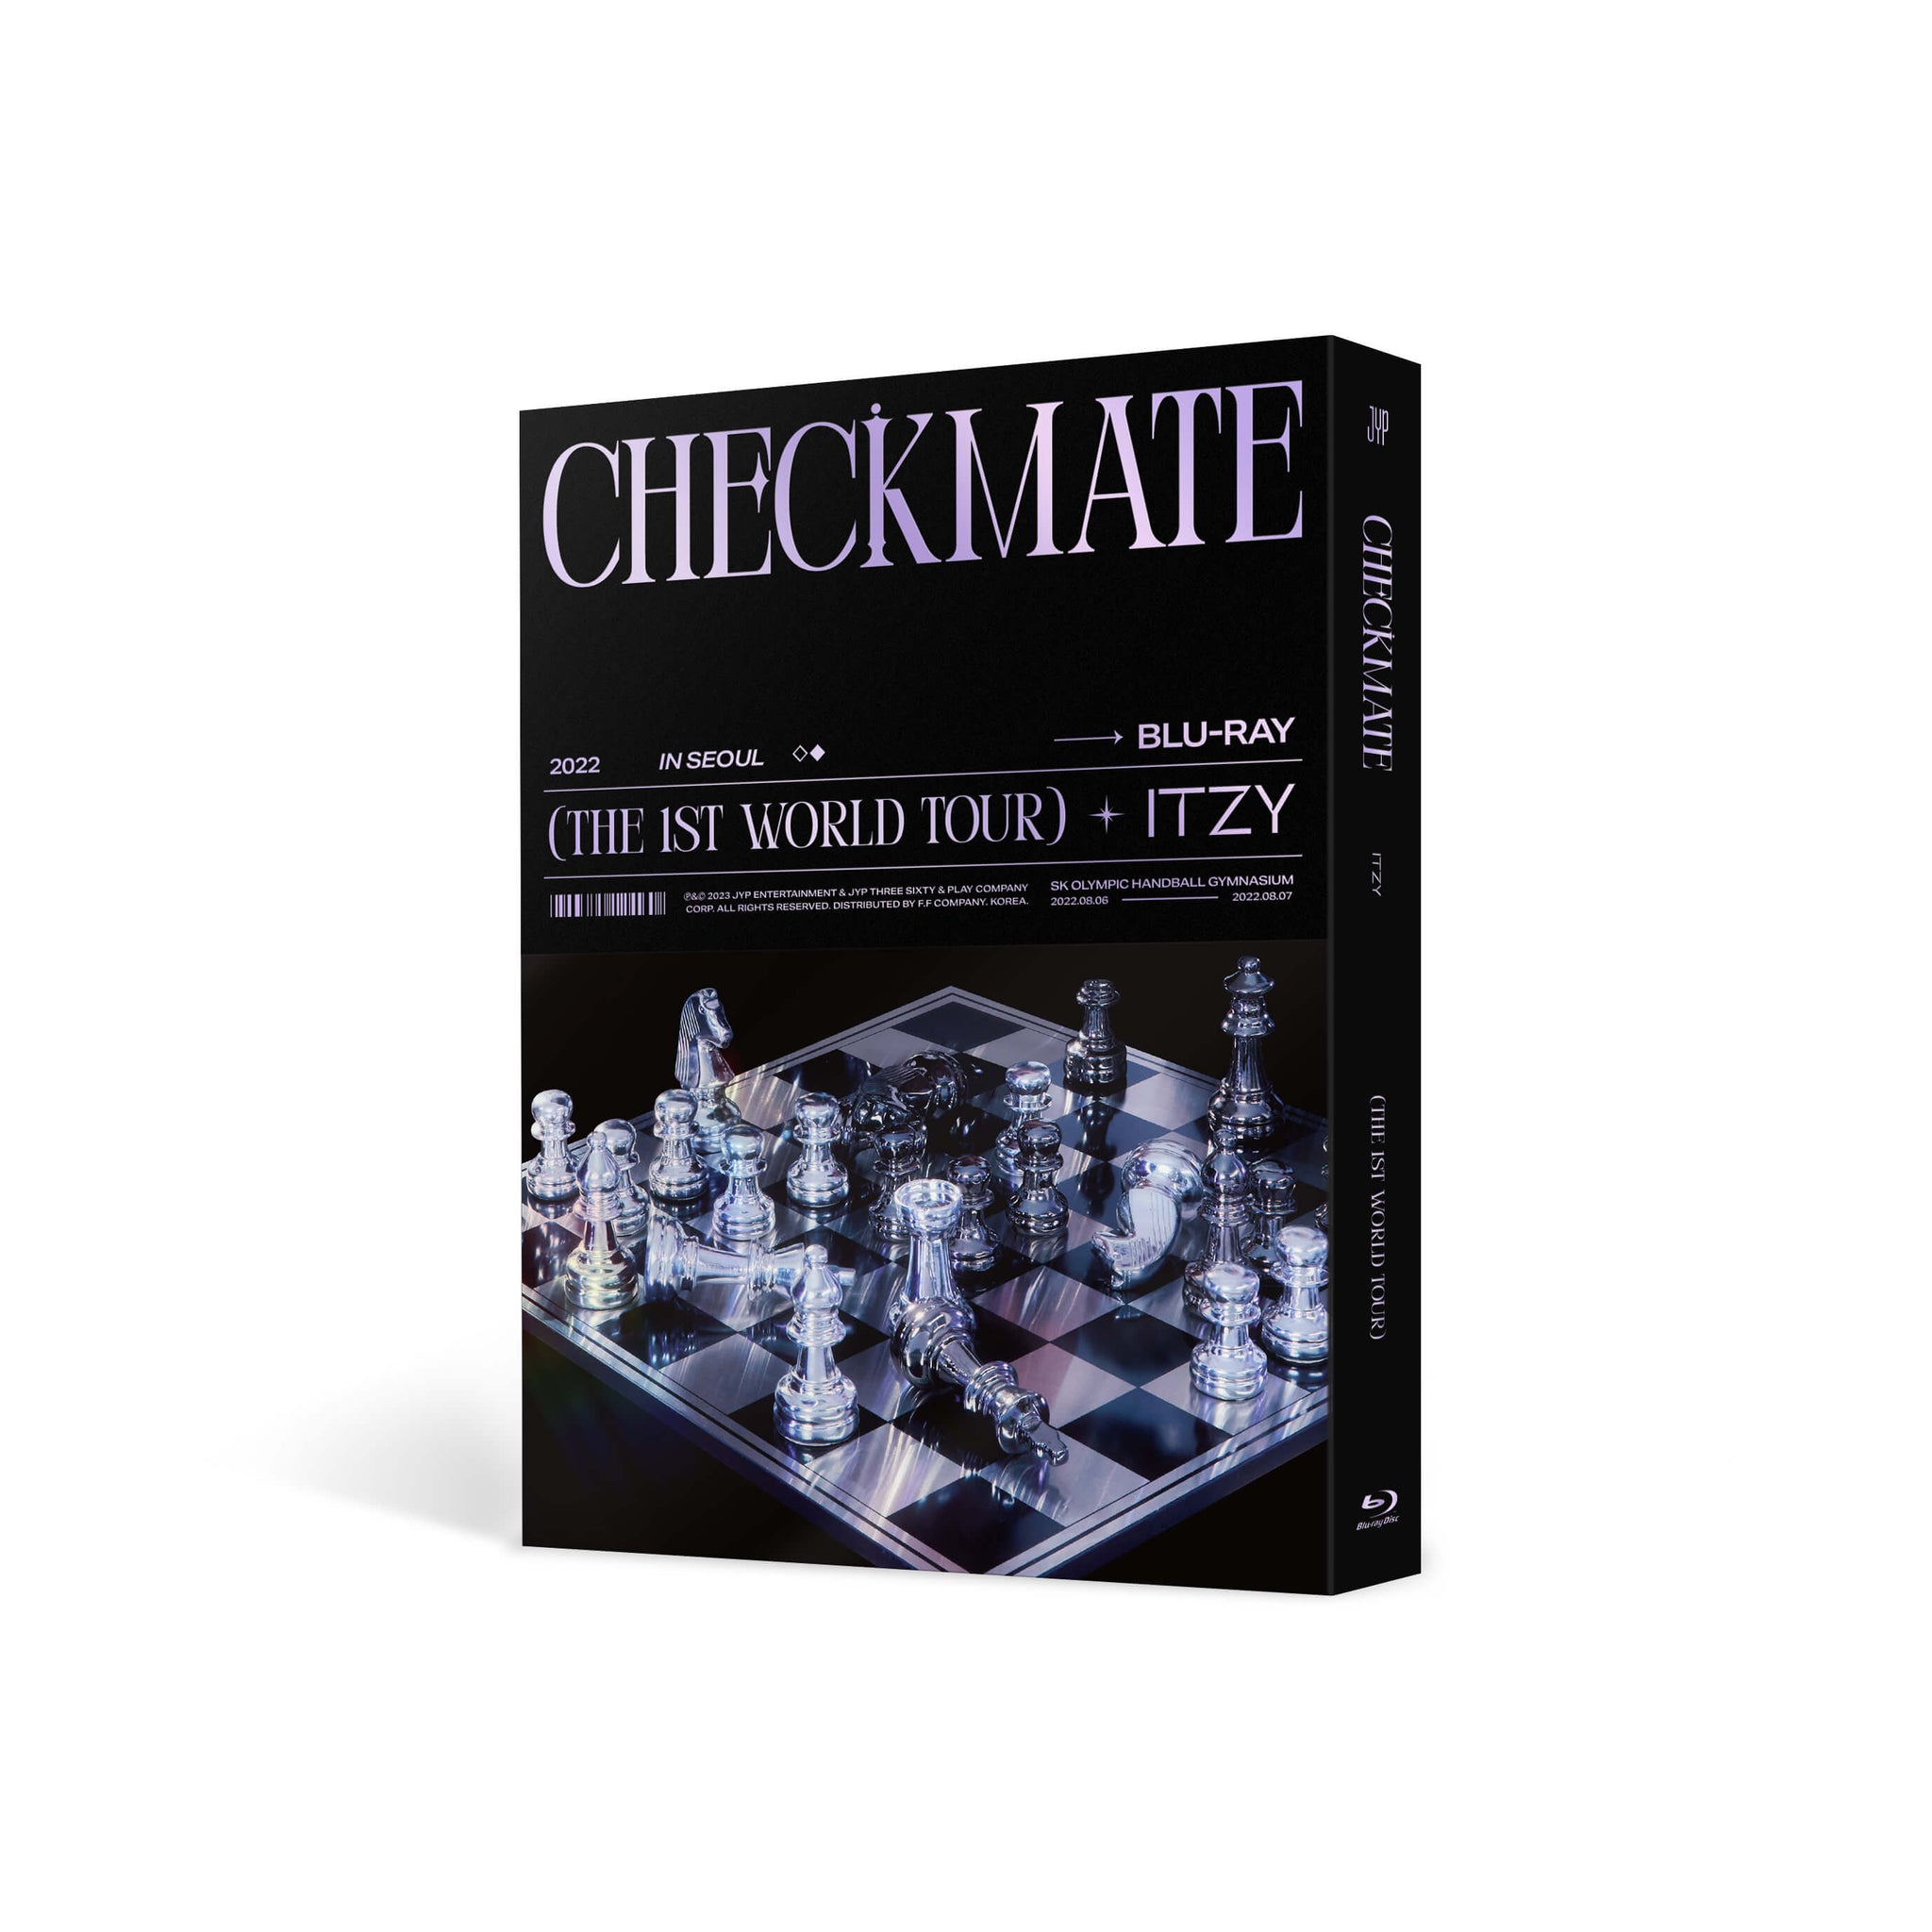 2022 ITZY THE 1ST WORLD TOUR CHECKMATE in SEOUL Blu-ray